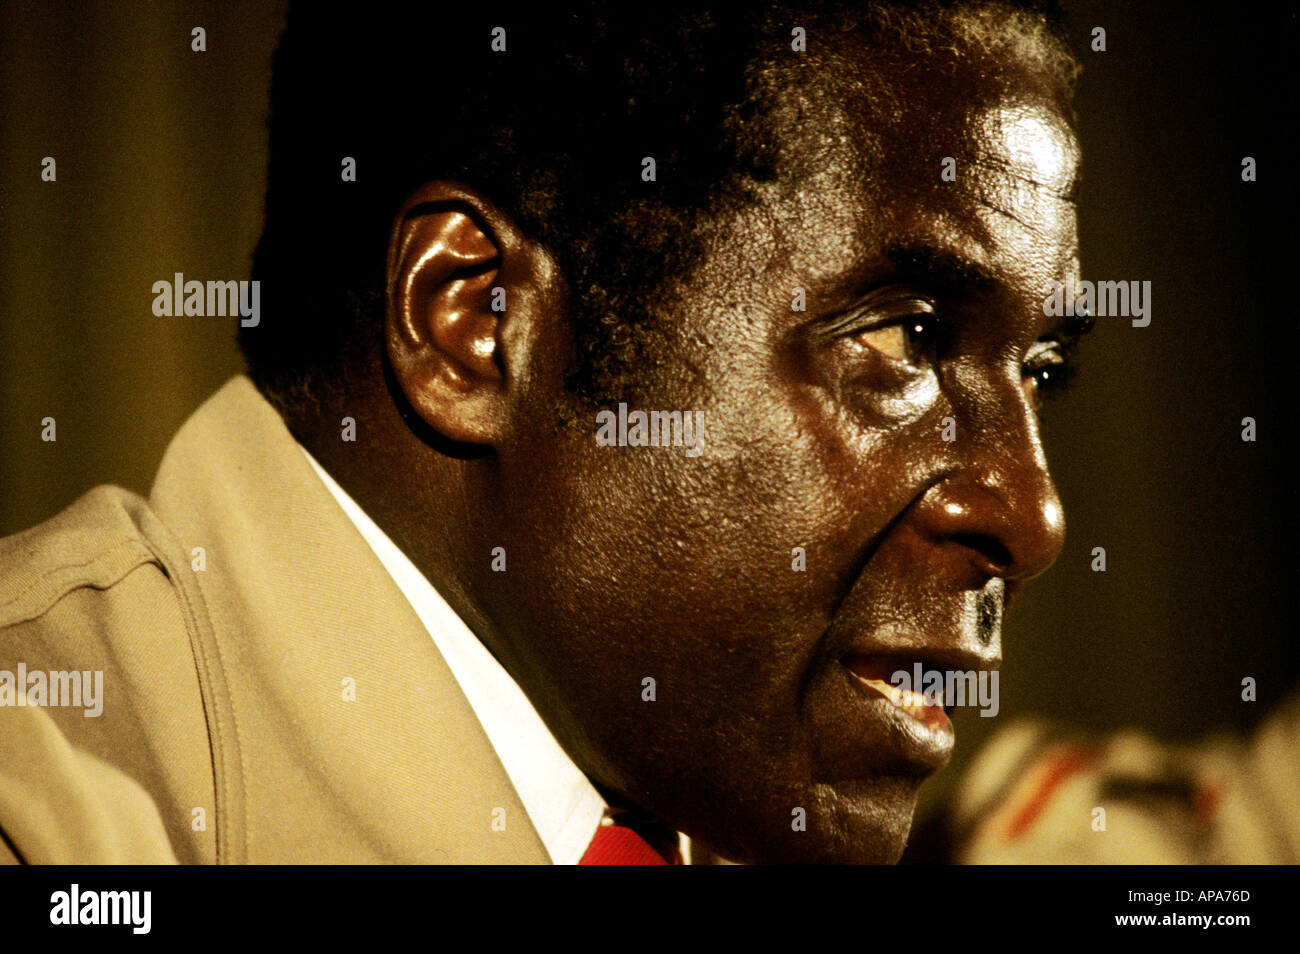 ROBERT MUGABE BY  STOCK FILE PHOTO MADE IN 1980 WHEN ROBERT MUGABE RETURNED FROM EXILE TO RHODESIA NOW ZIMBABWE Stock Photo